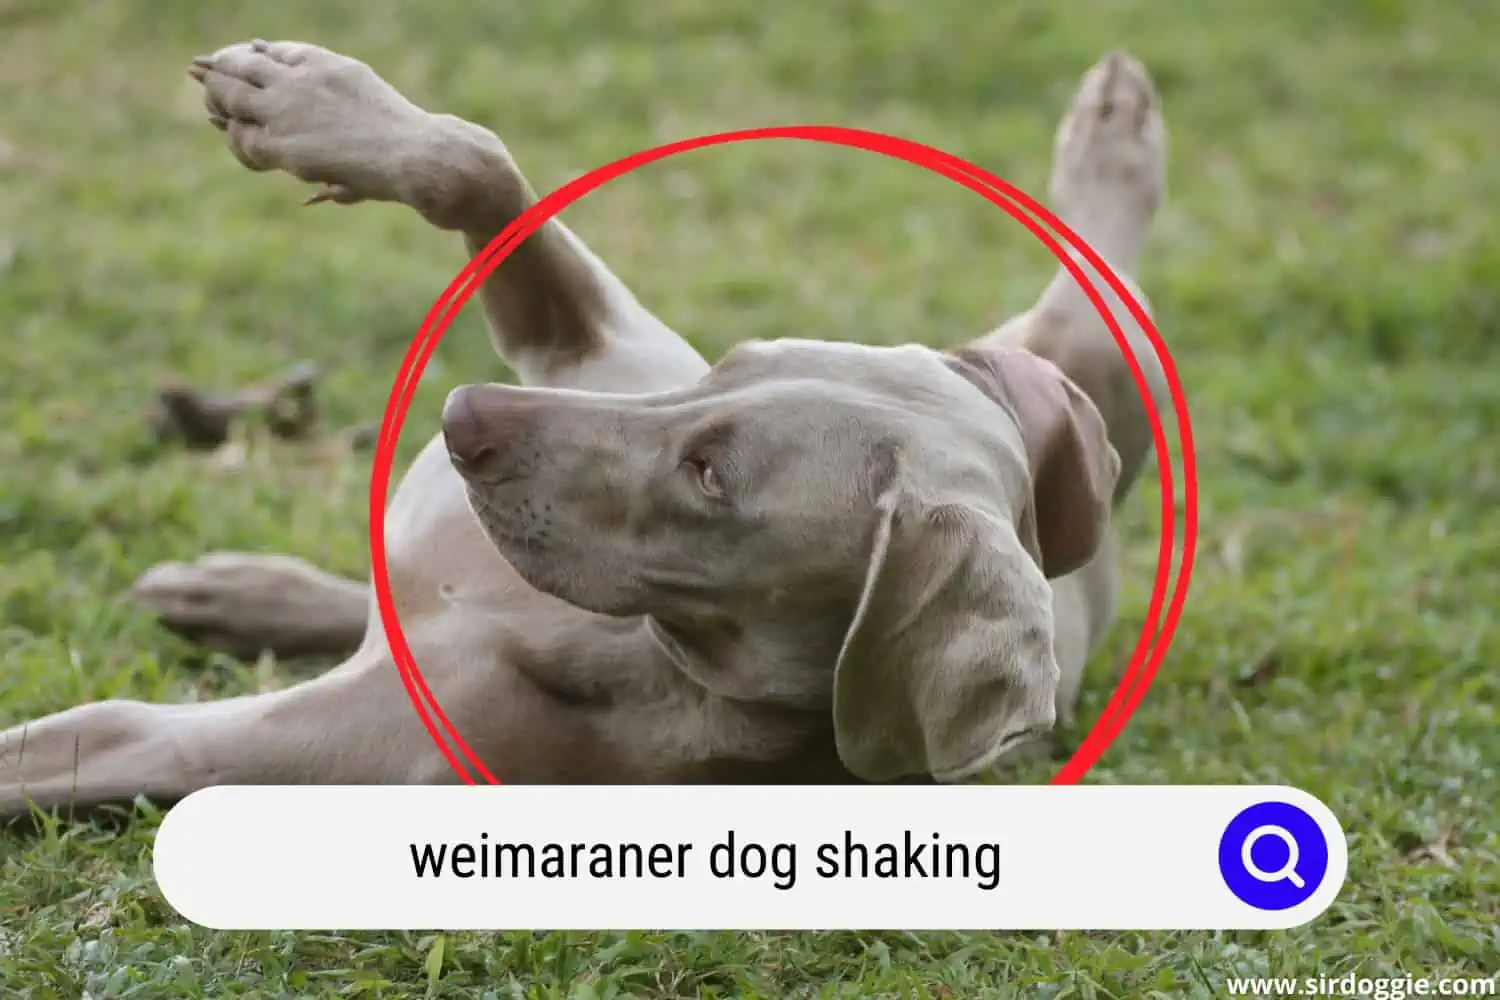 Weimaraner shaking on the field after exercise